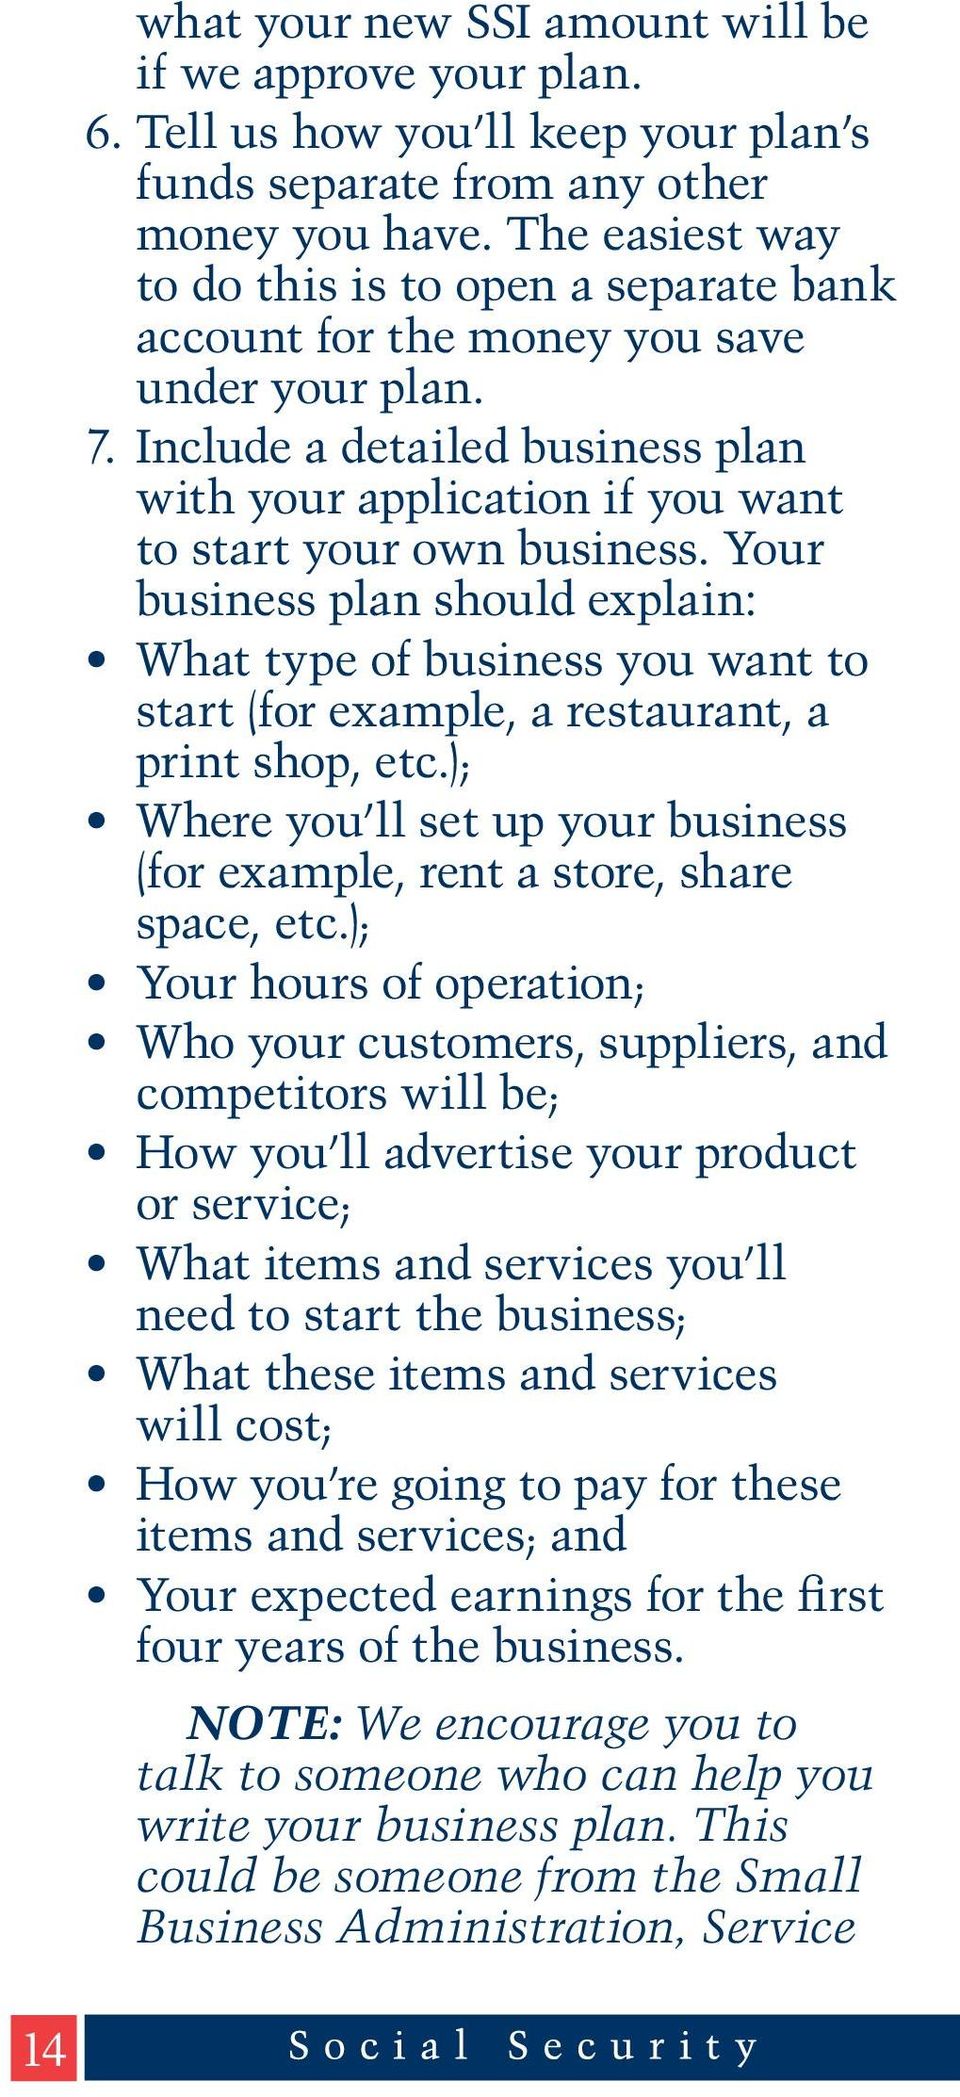 Your business plan should explain: What type of business you want to start (for example, a restaurant, a print shop, etc.